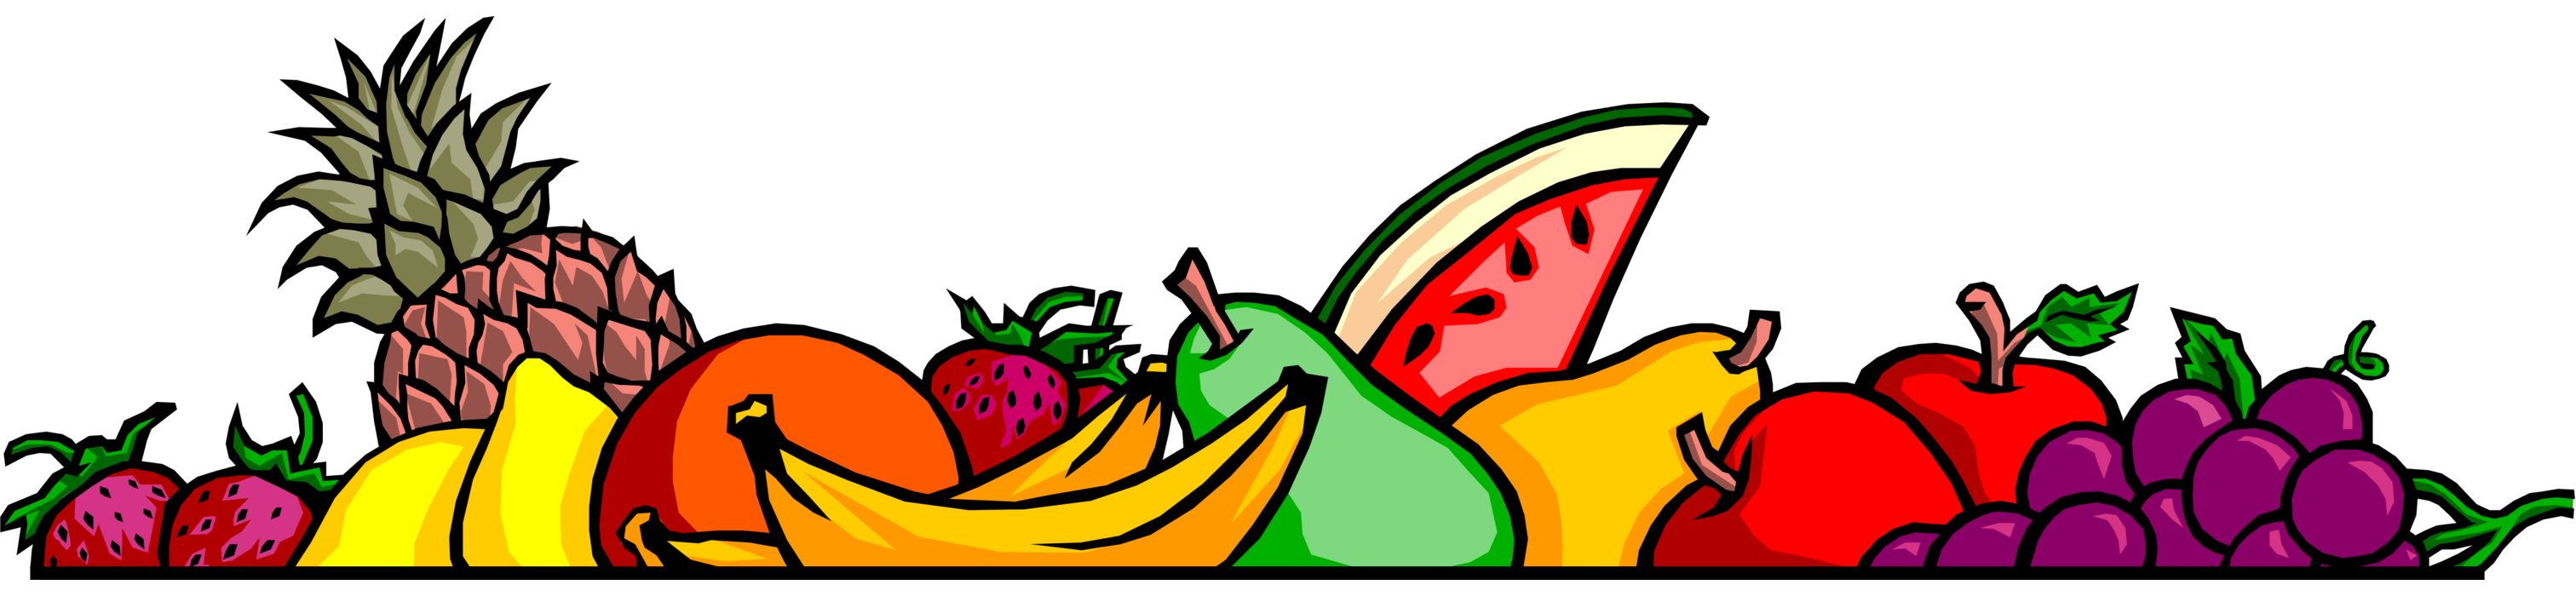 Vector Illustration of Fresh Fruits with Grapes, Apples, Pears, Melon, Bananas, Citrus, Pineapple and Strawberries